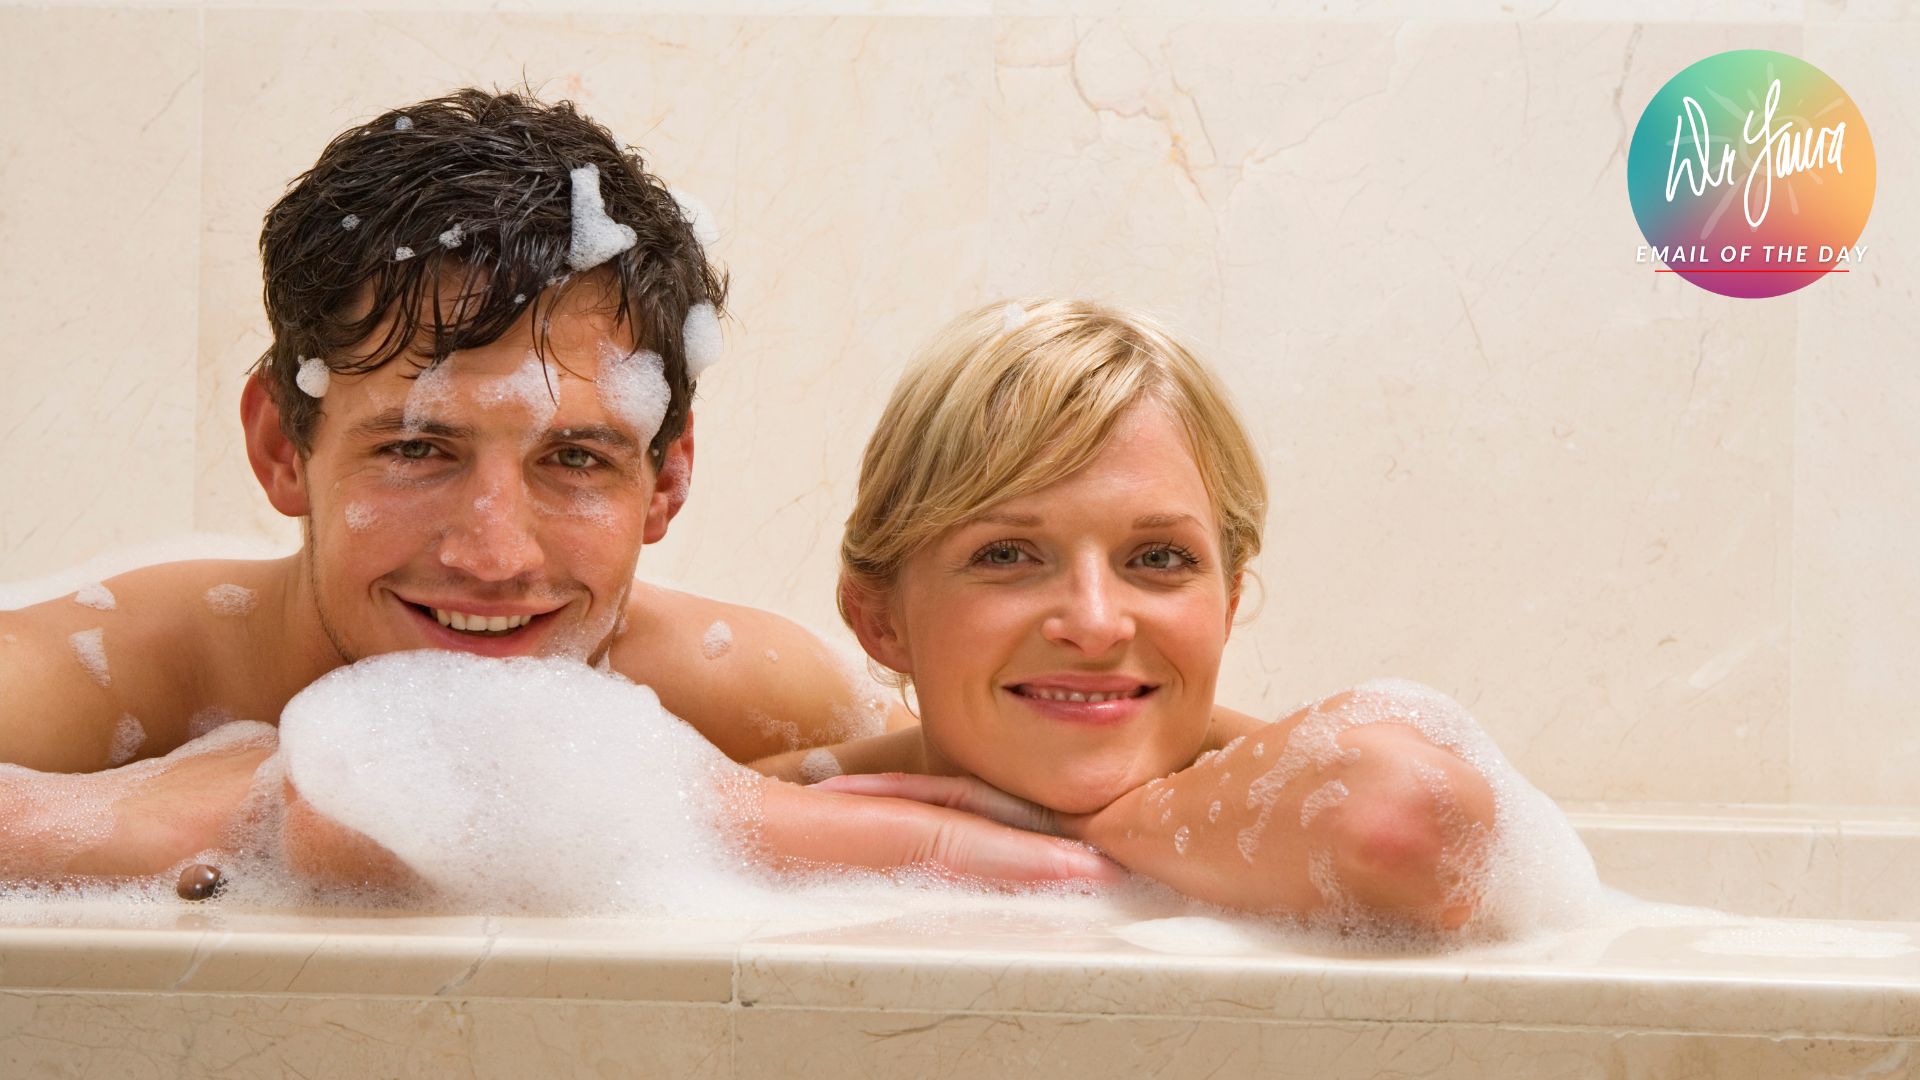 Woman rests head and arms on the edge of the tub while man sits next to her smiling